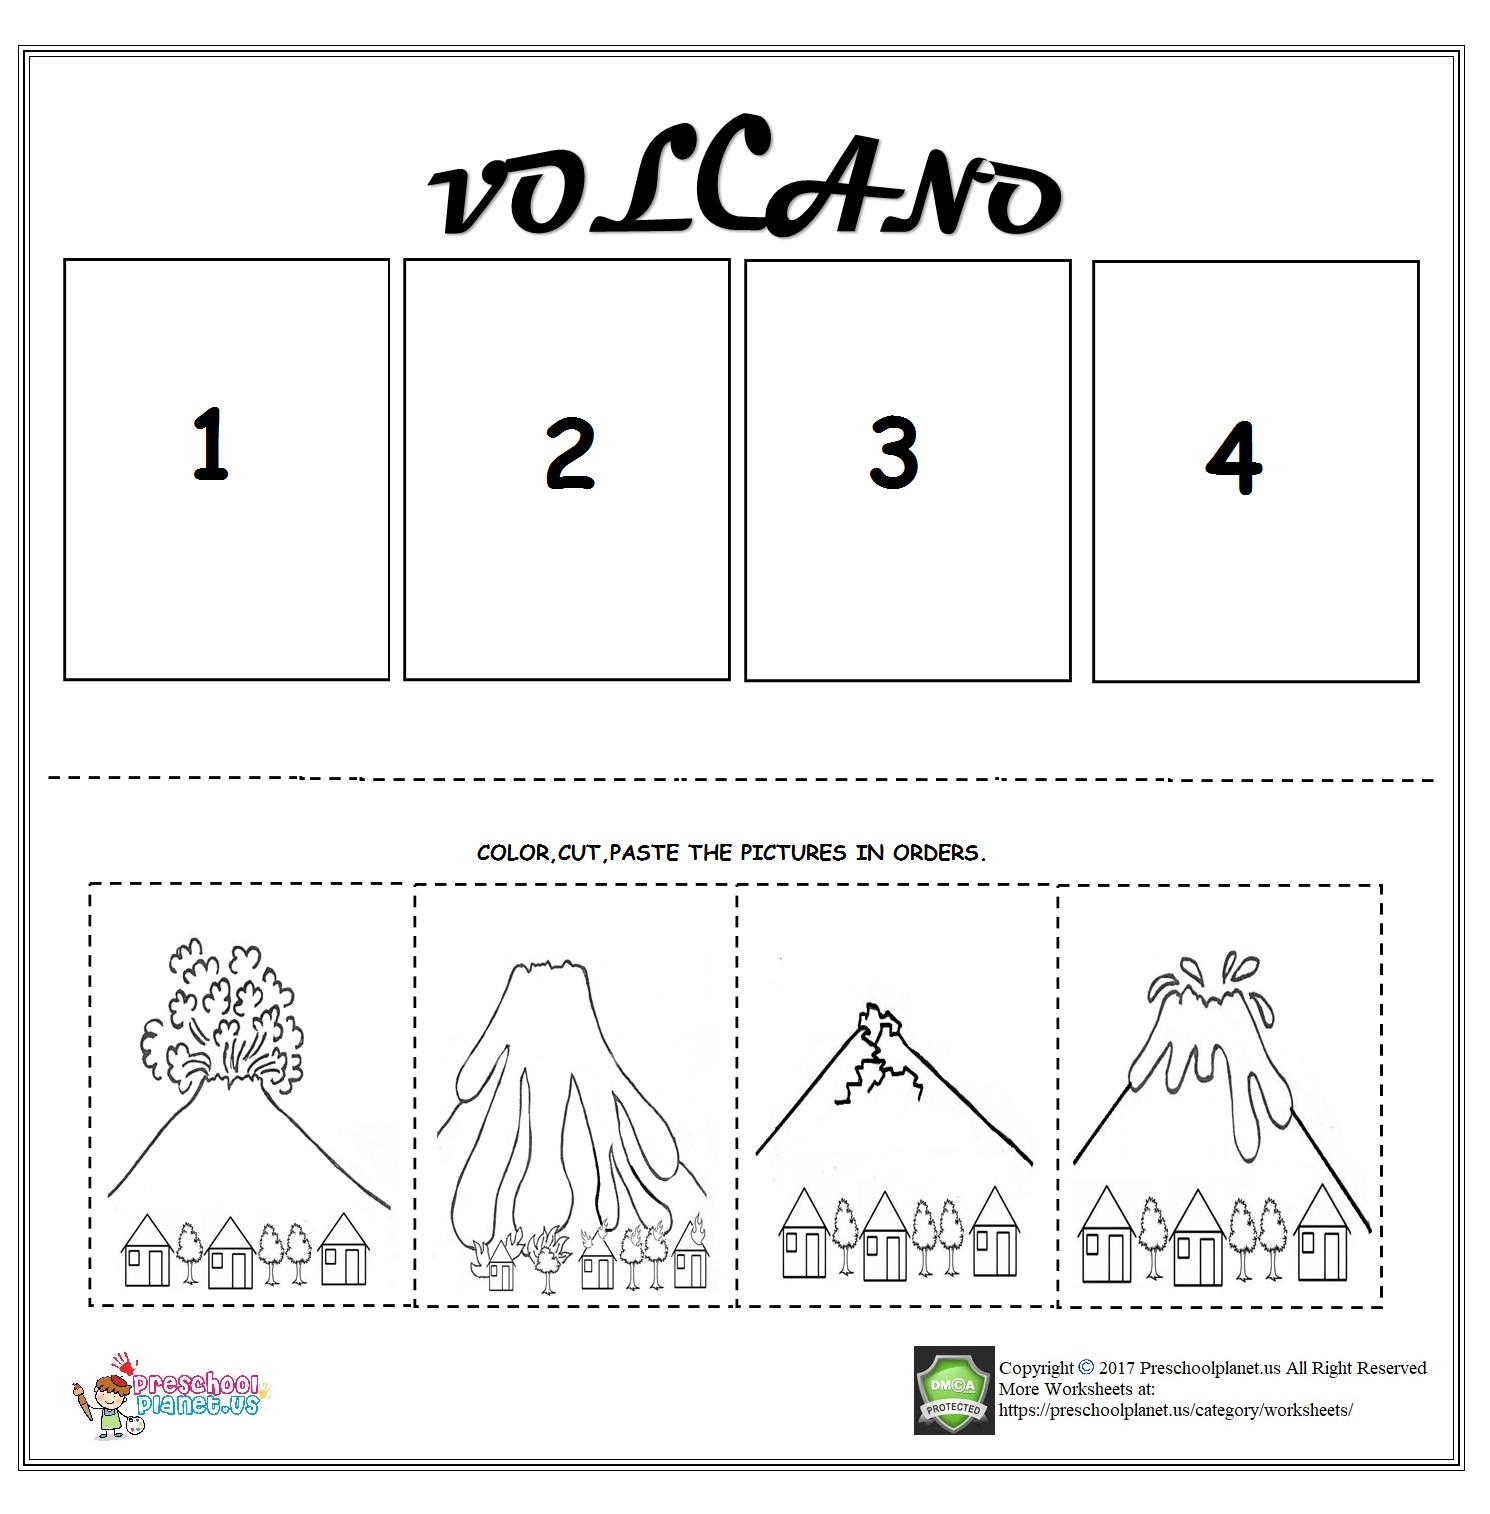 image-result-for-free-printable-template-moon-volcano-science